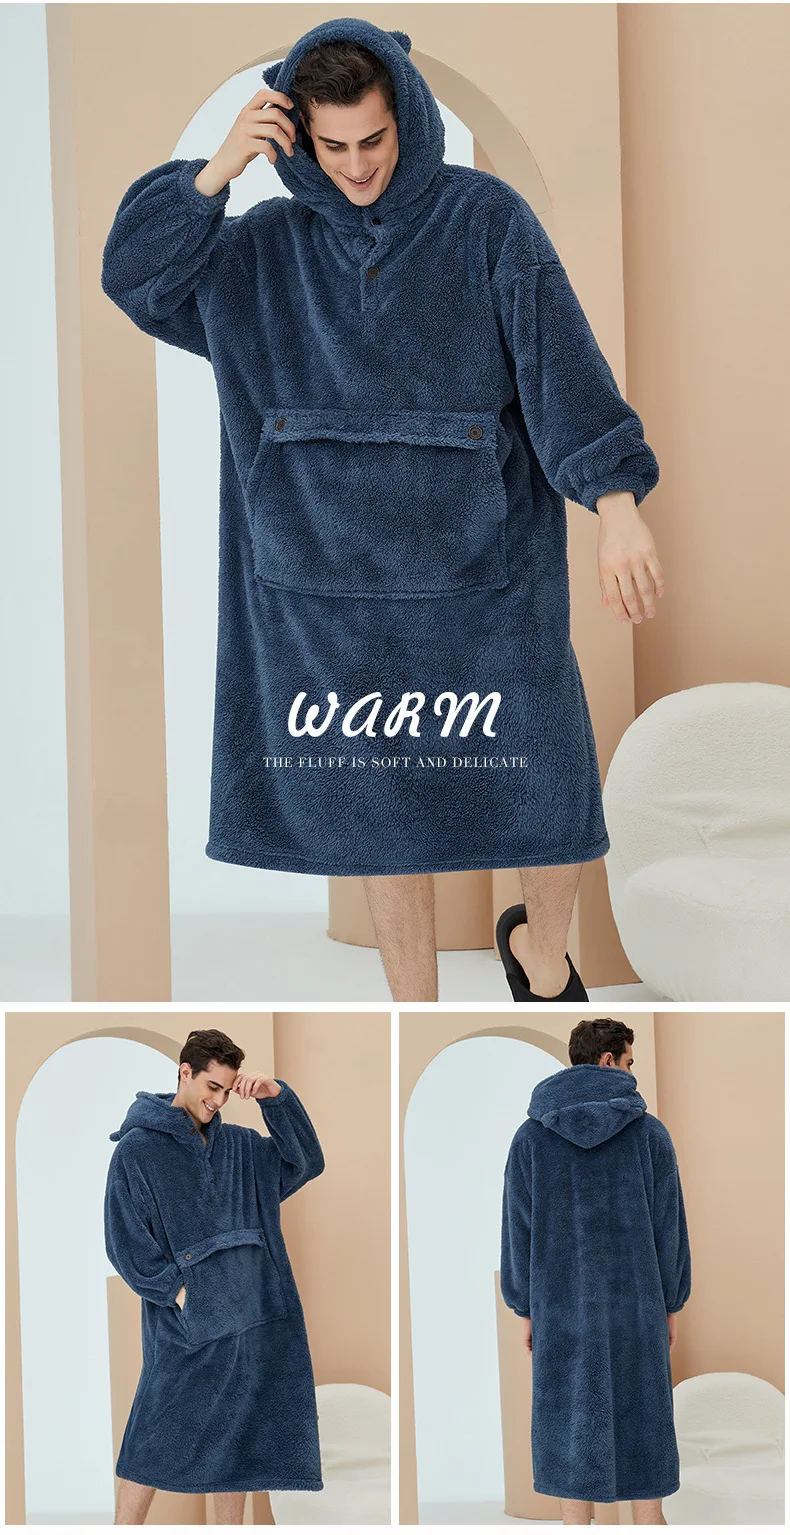 Unisex Robes Men Winter Dressing Gown Winter Warm Fleece Robe Pullover Hooded Women Winter Dressing Gown Robes Soft Bathrobe red pajama pants